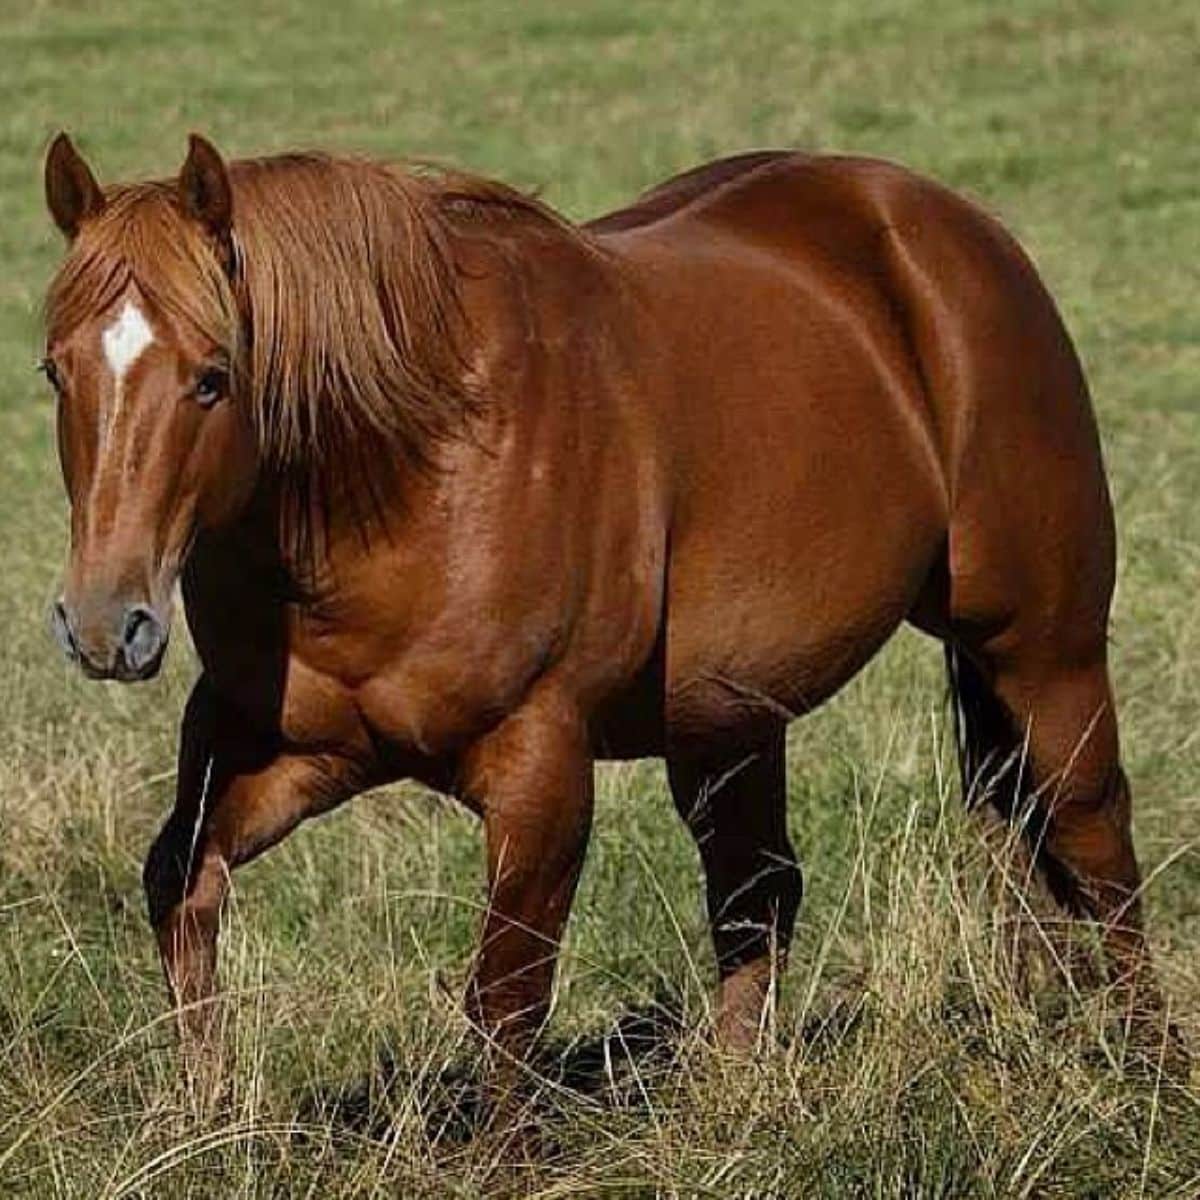 A huge muscly sorrel chestnut horse walks on a meadow.